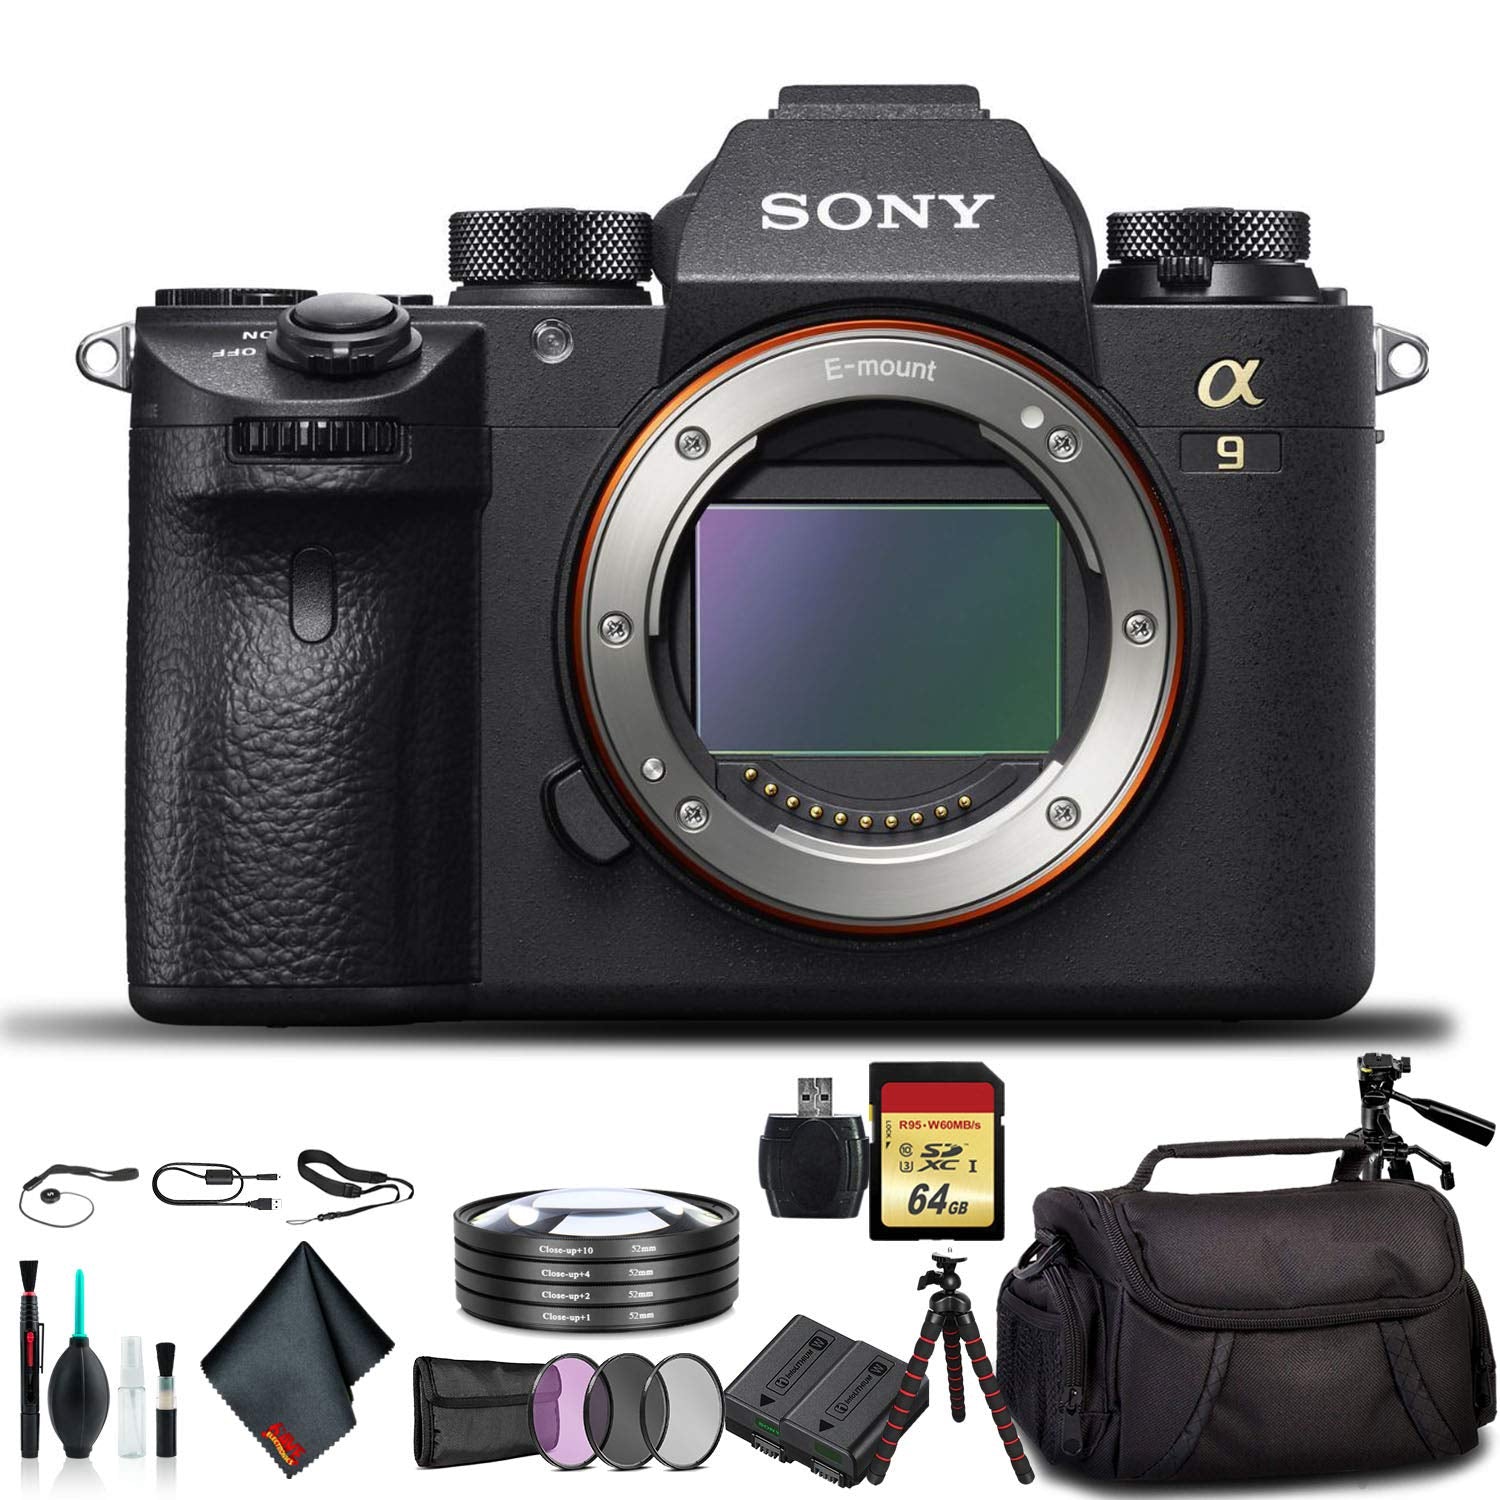 Sony Alpha a9 Mirrorless Camera ILCE9/B With Soft Bag, Tripod, Additional Battery, 64GB Memory Card, Card Reader , Plus Essential Accessories